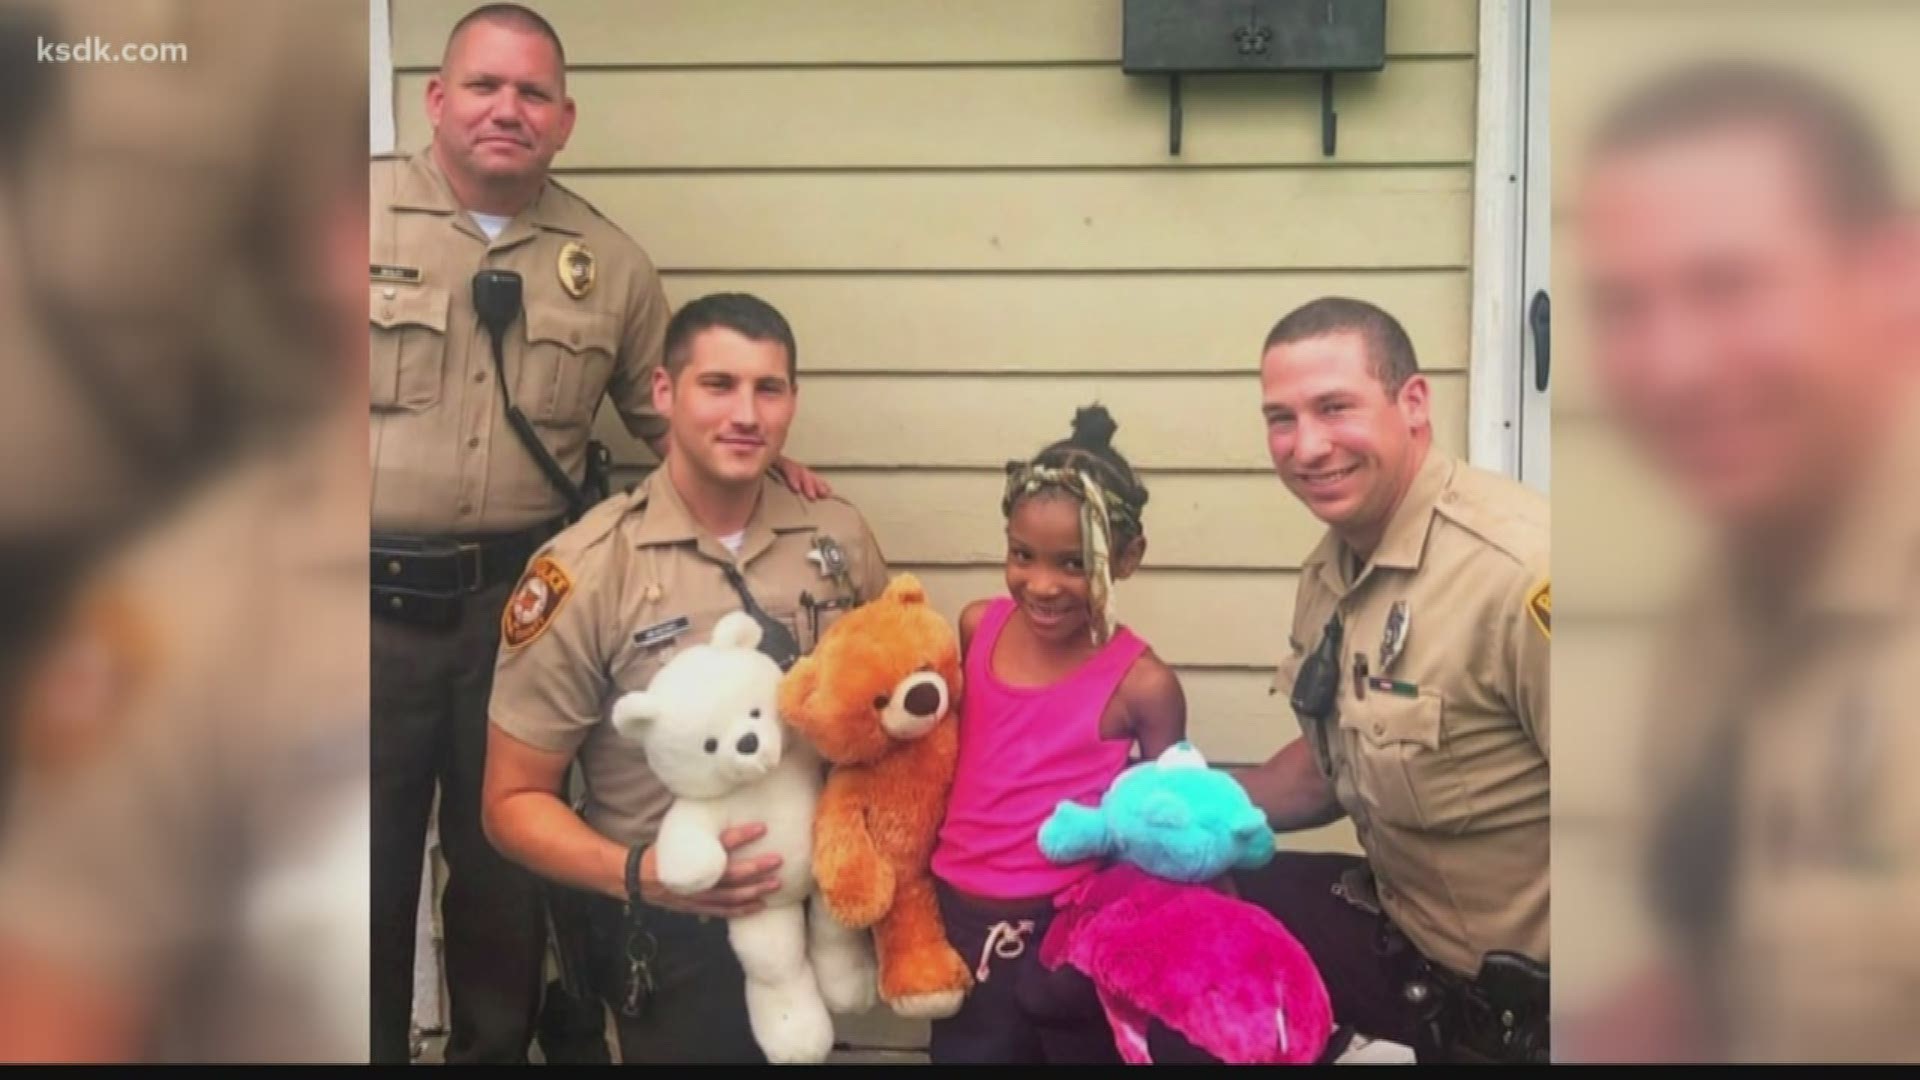 "We brought her a whole bunch of teddy bears and she said she loved every single one of them."